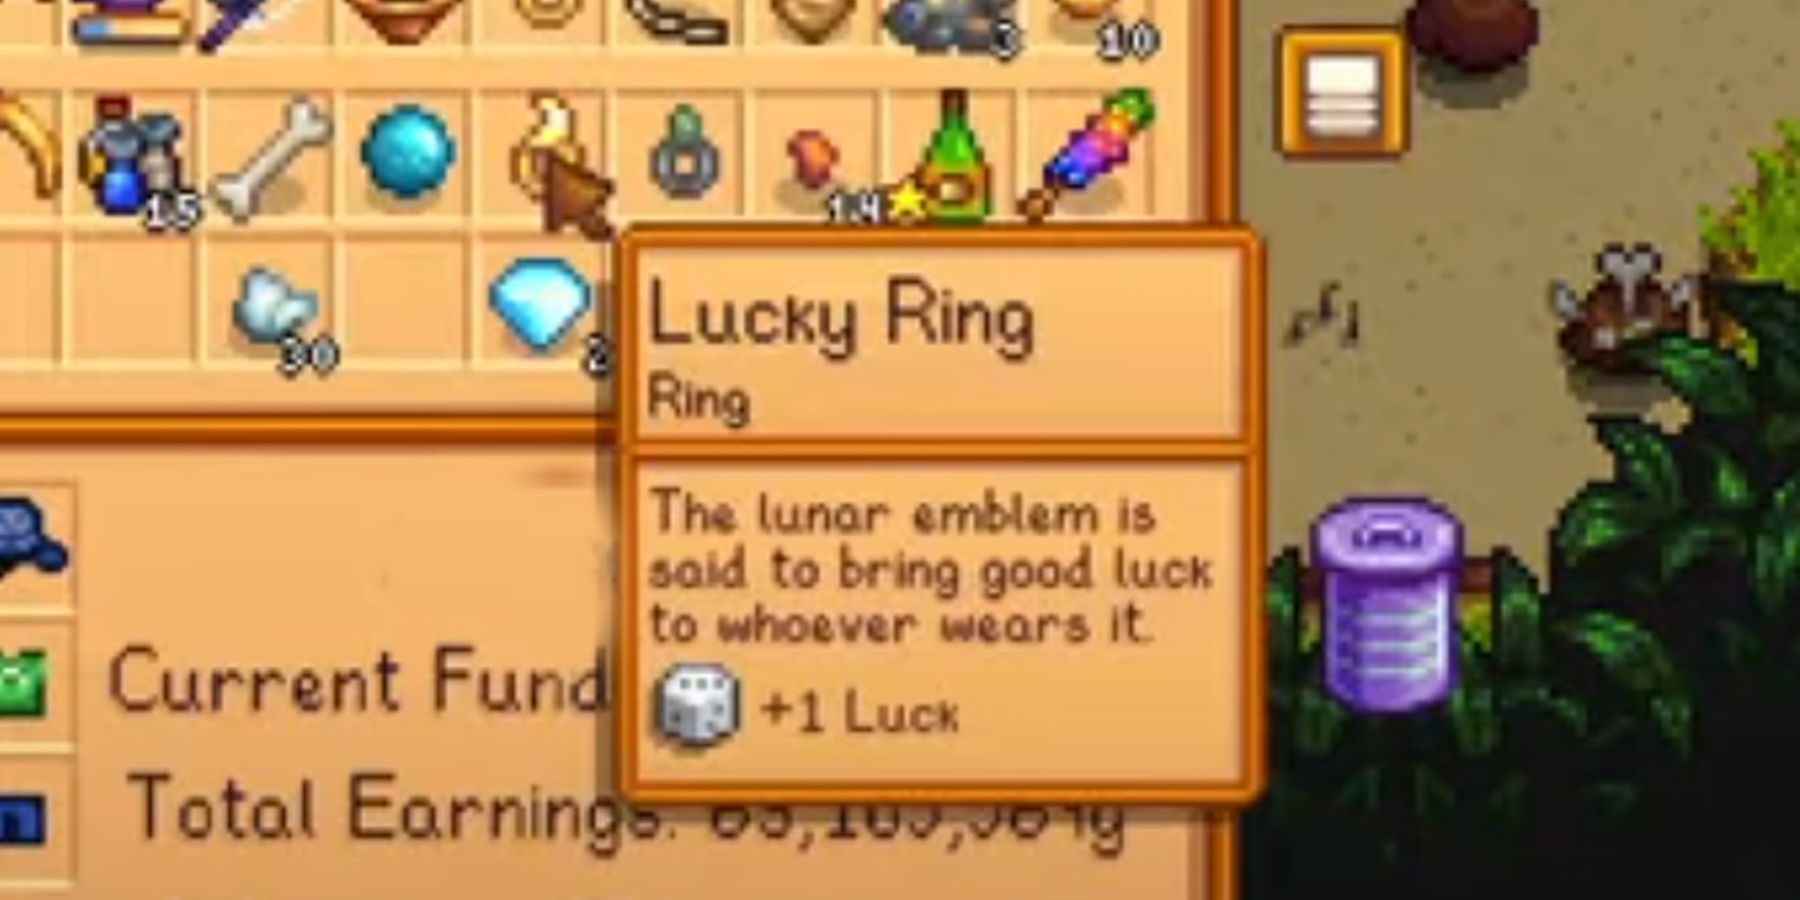 The Lucky Ring in Stardew Valley